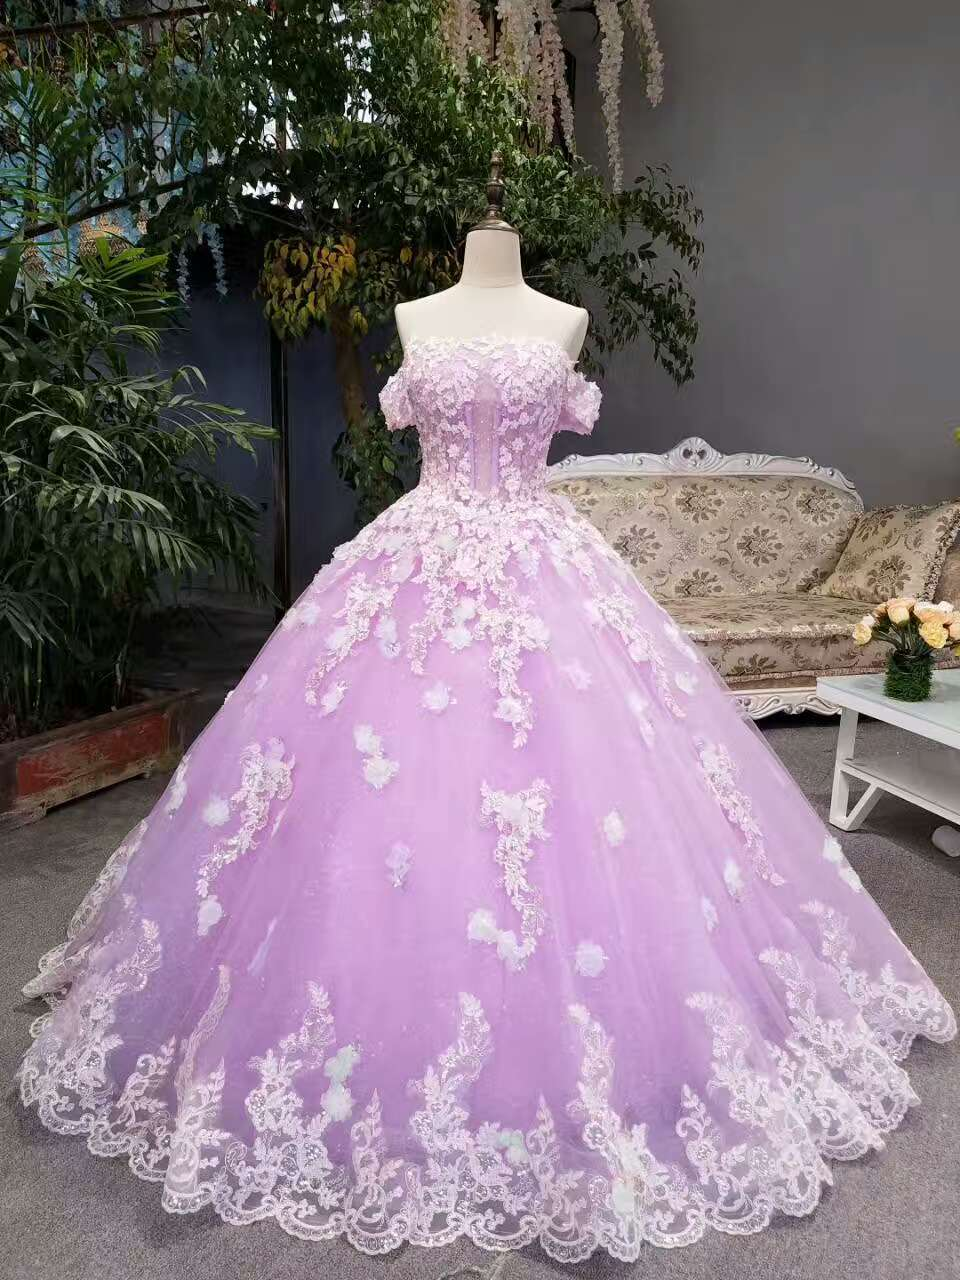 New Arrival Floral Wedding Dresses A-Line Floor Length Lace Up Off The Shoulder Ball Gown With Beads And Appliques Y1090